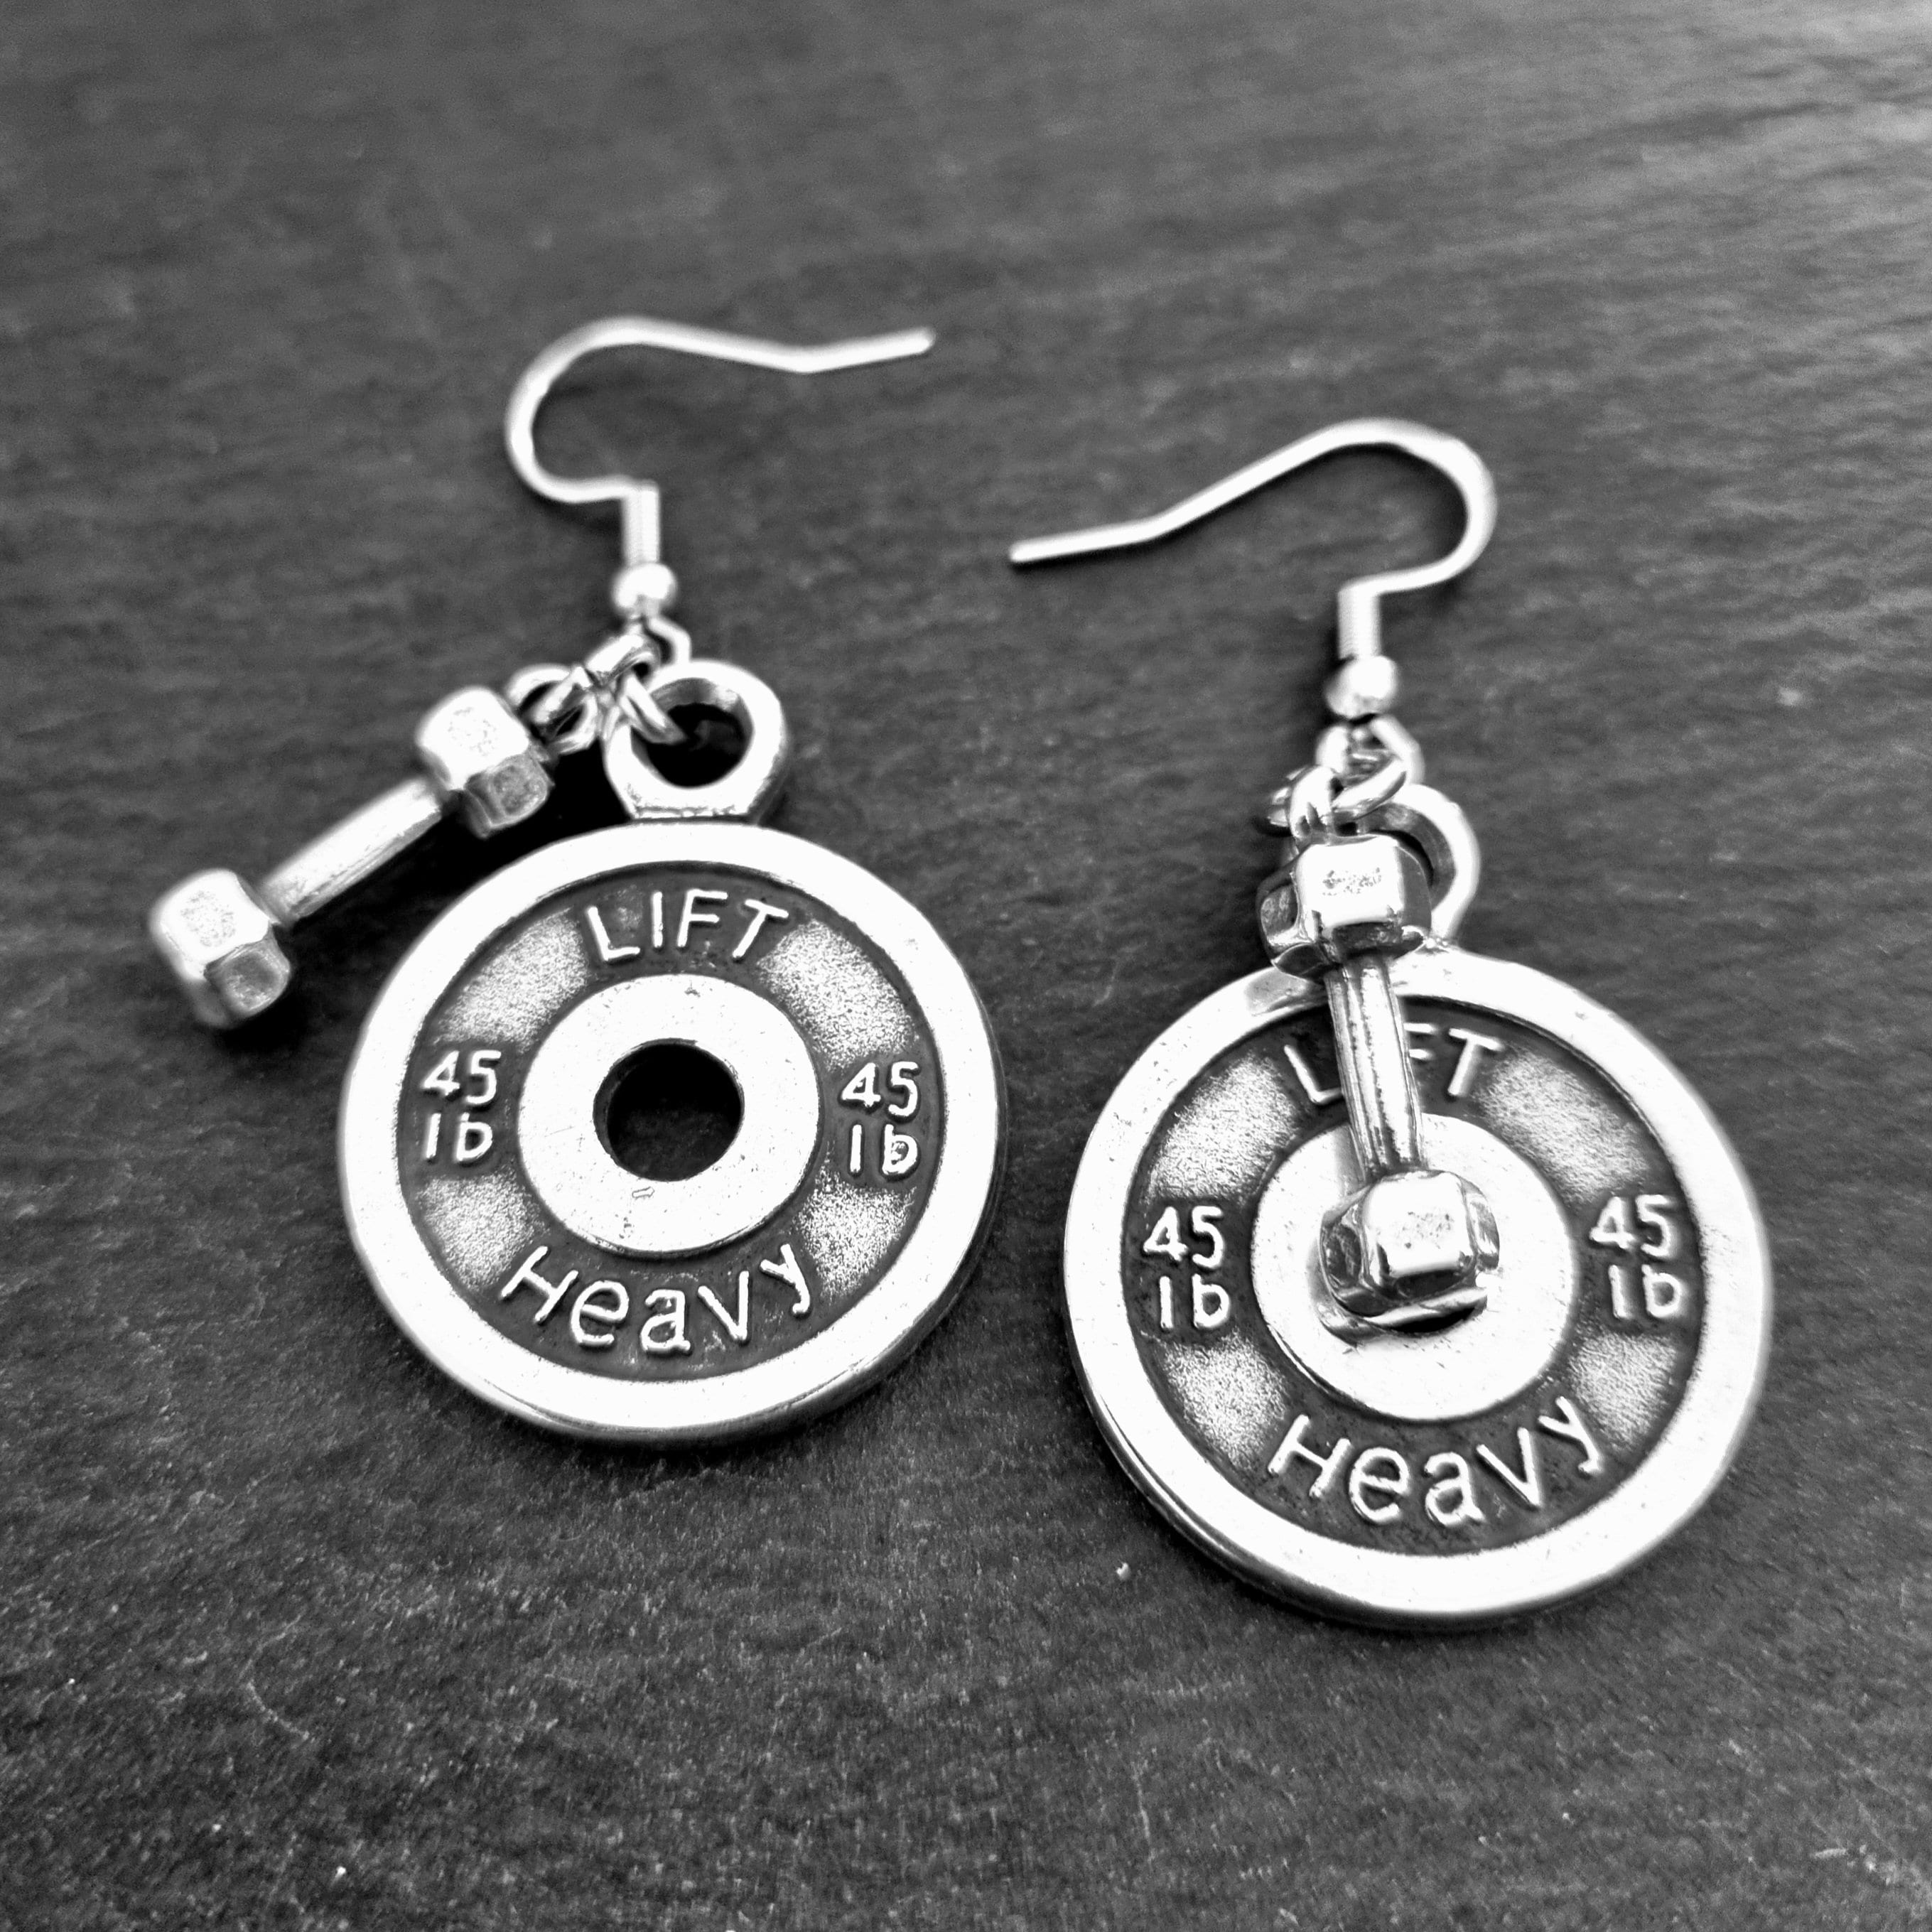 Gym Earrings Lift Heavy Weight Plate 45lbs Dumbbell- Weight lifting ·  Fitness - sports earrings - Barbell Earrings - Bodybuilding Wod & Fit